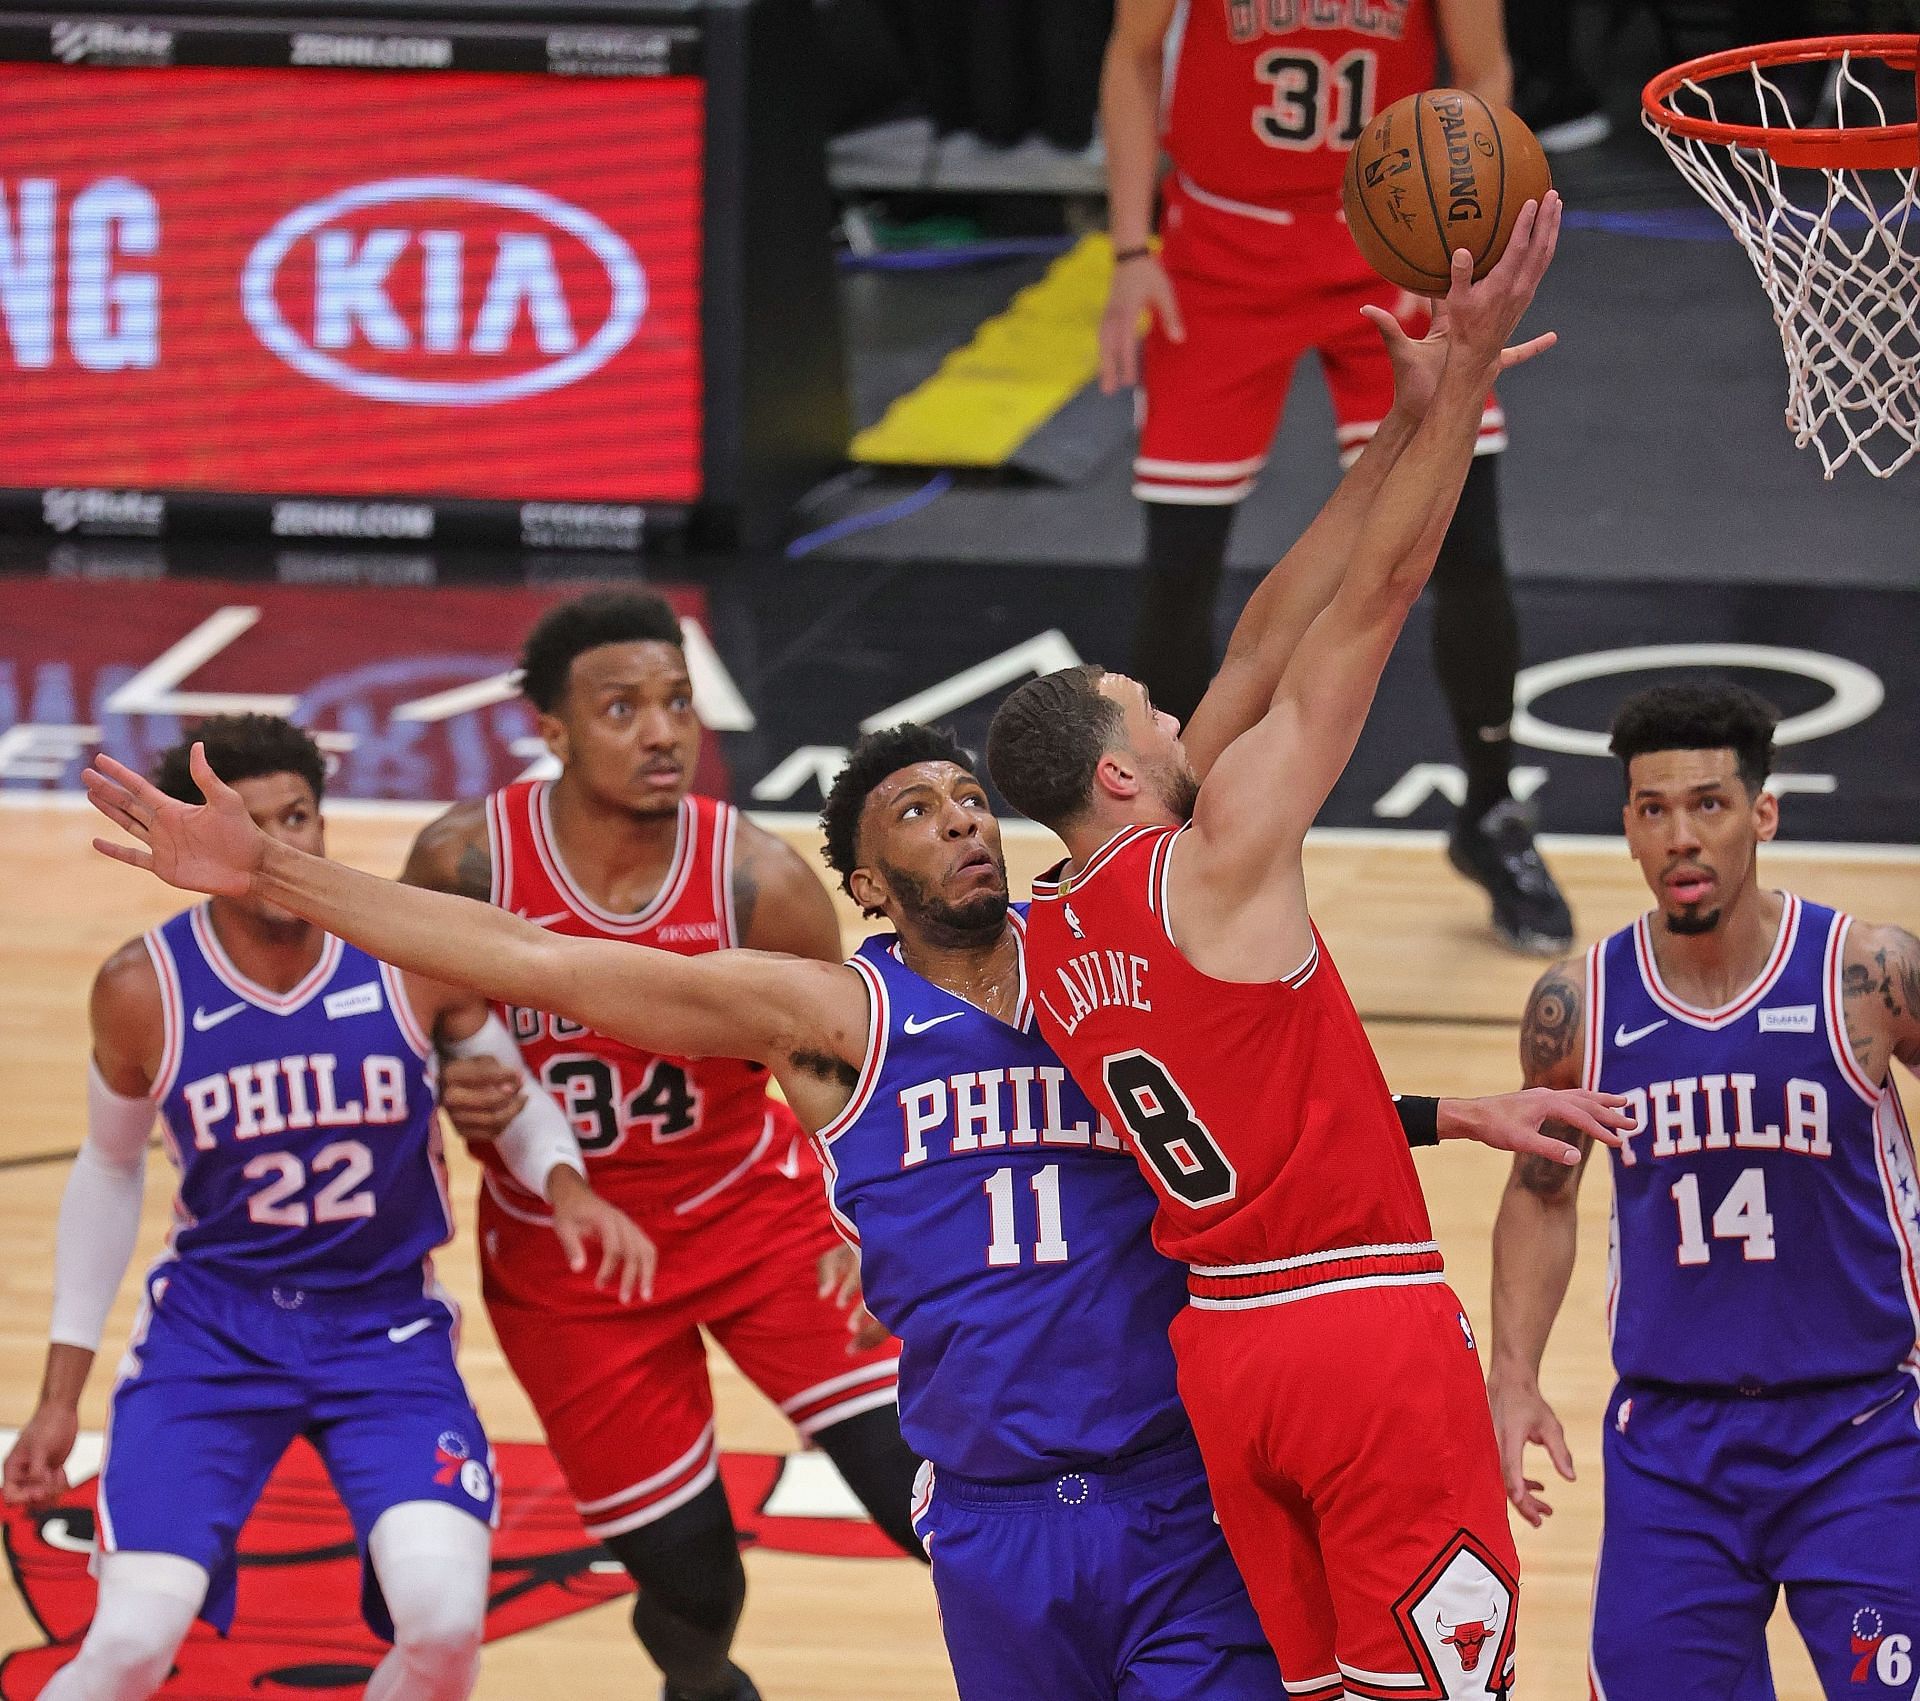 The Philadelphia 76ers wi;; play the Chicago Bulls on Saturday